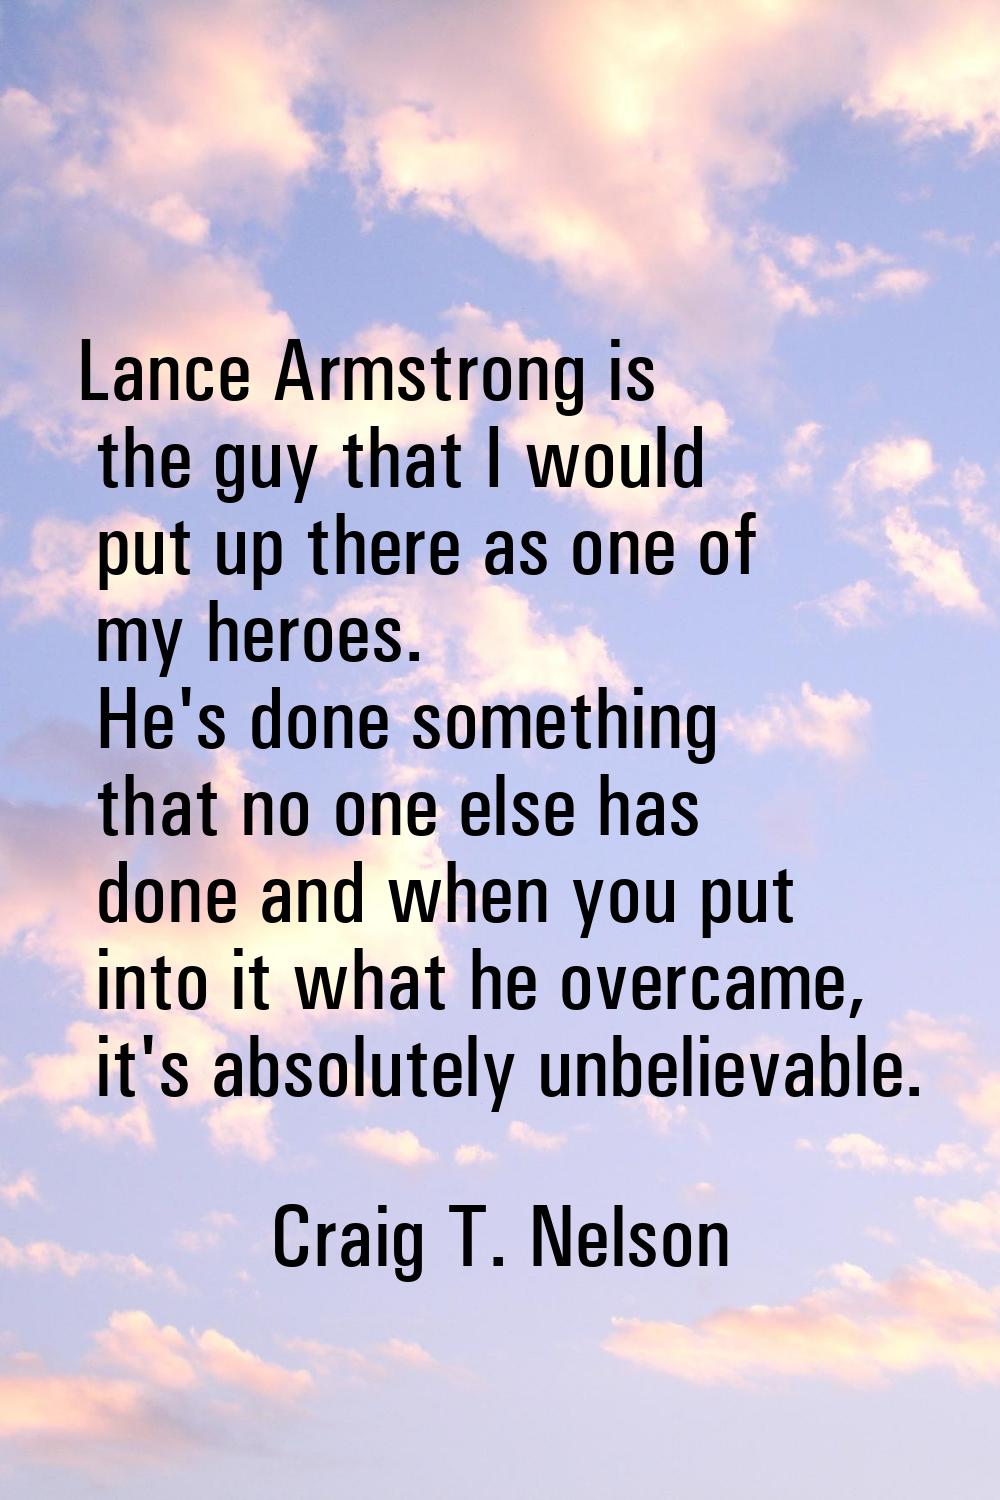 Lance Armstrong is the guy that I would put up there as one of my heroes. He's done something that 